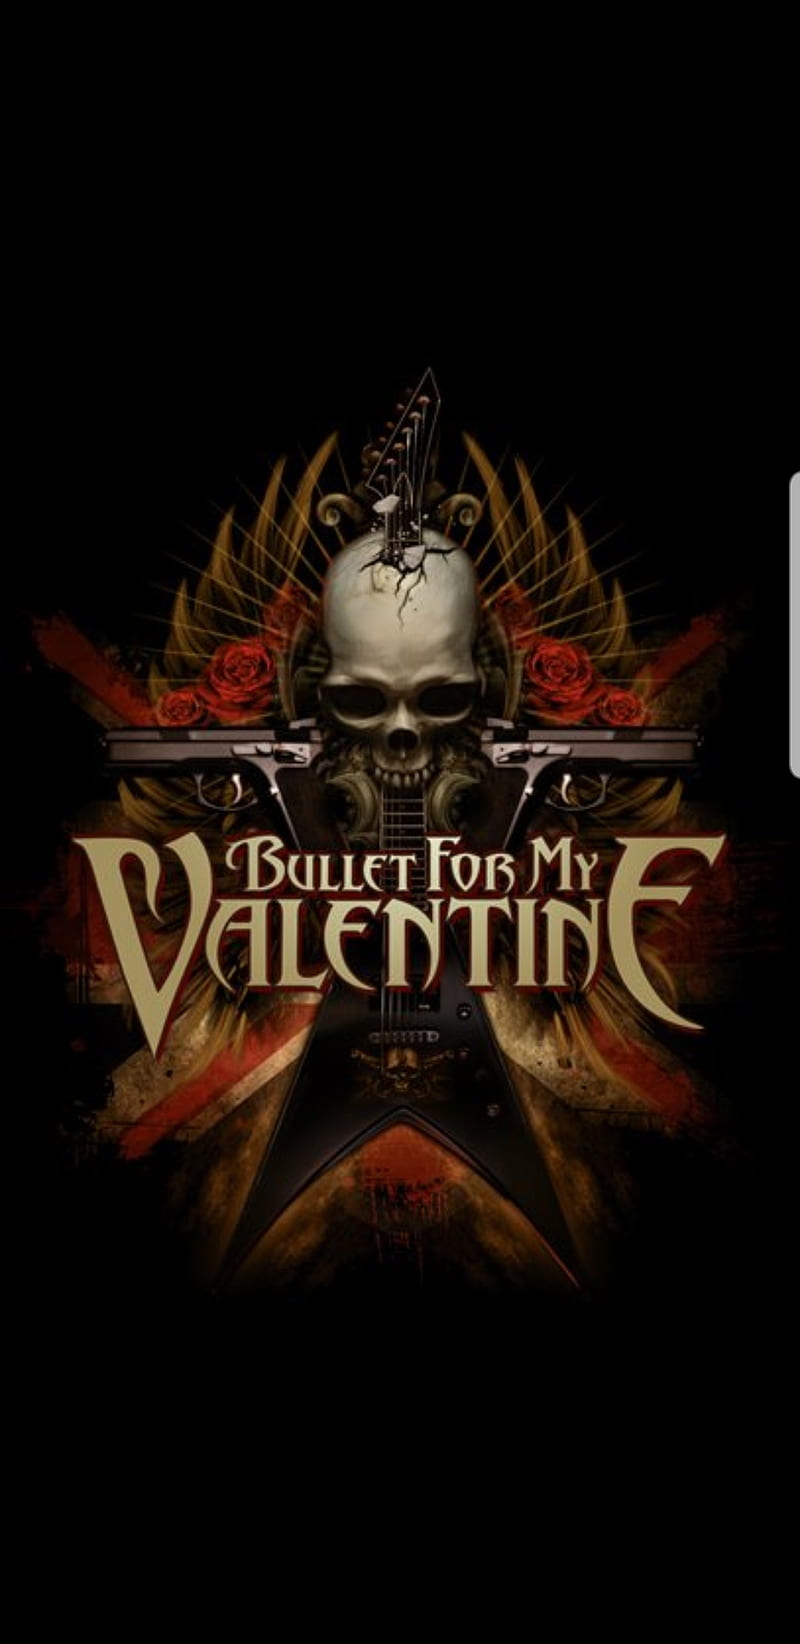 All these things I hate revolve around me - Bullet For My Valentine  Wallpaper (18157085) - Fanpop